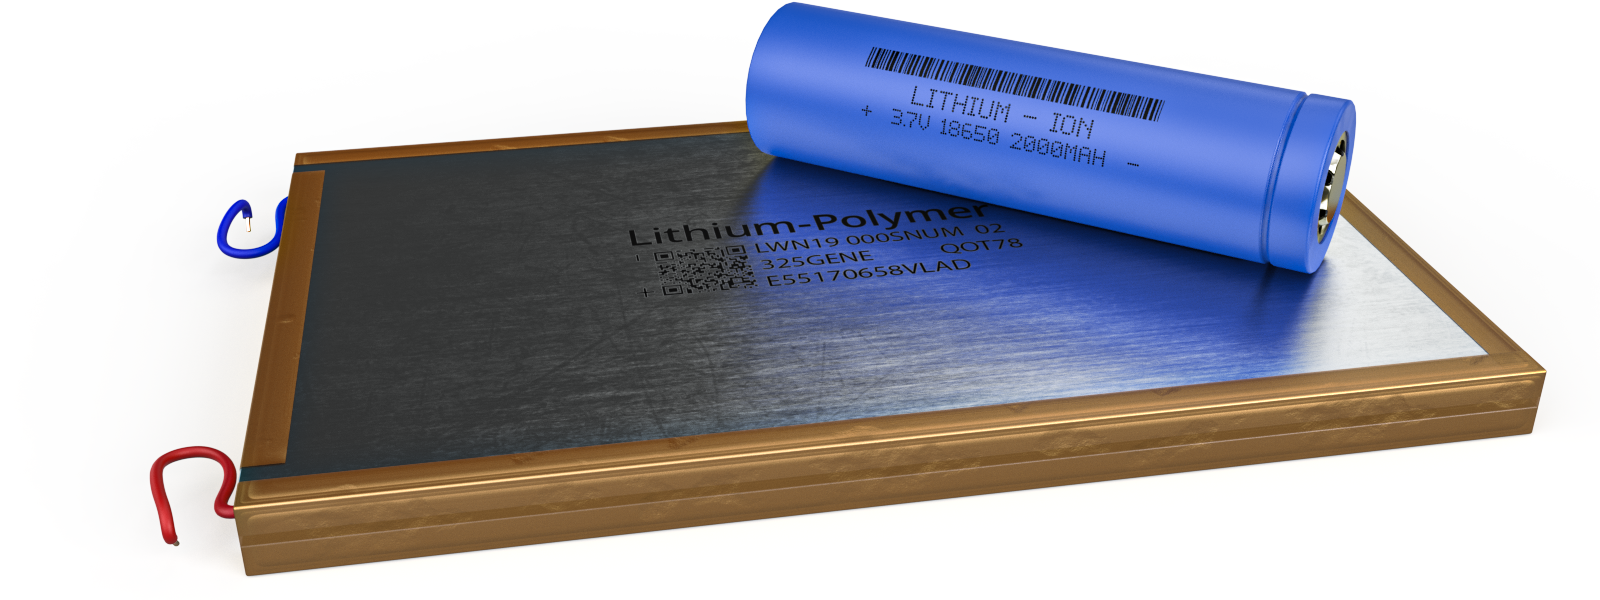 Сomparing lithium ion with lithium polymer battery